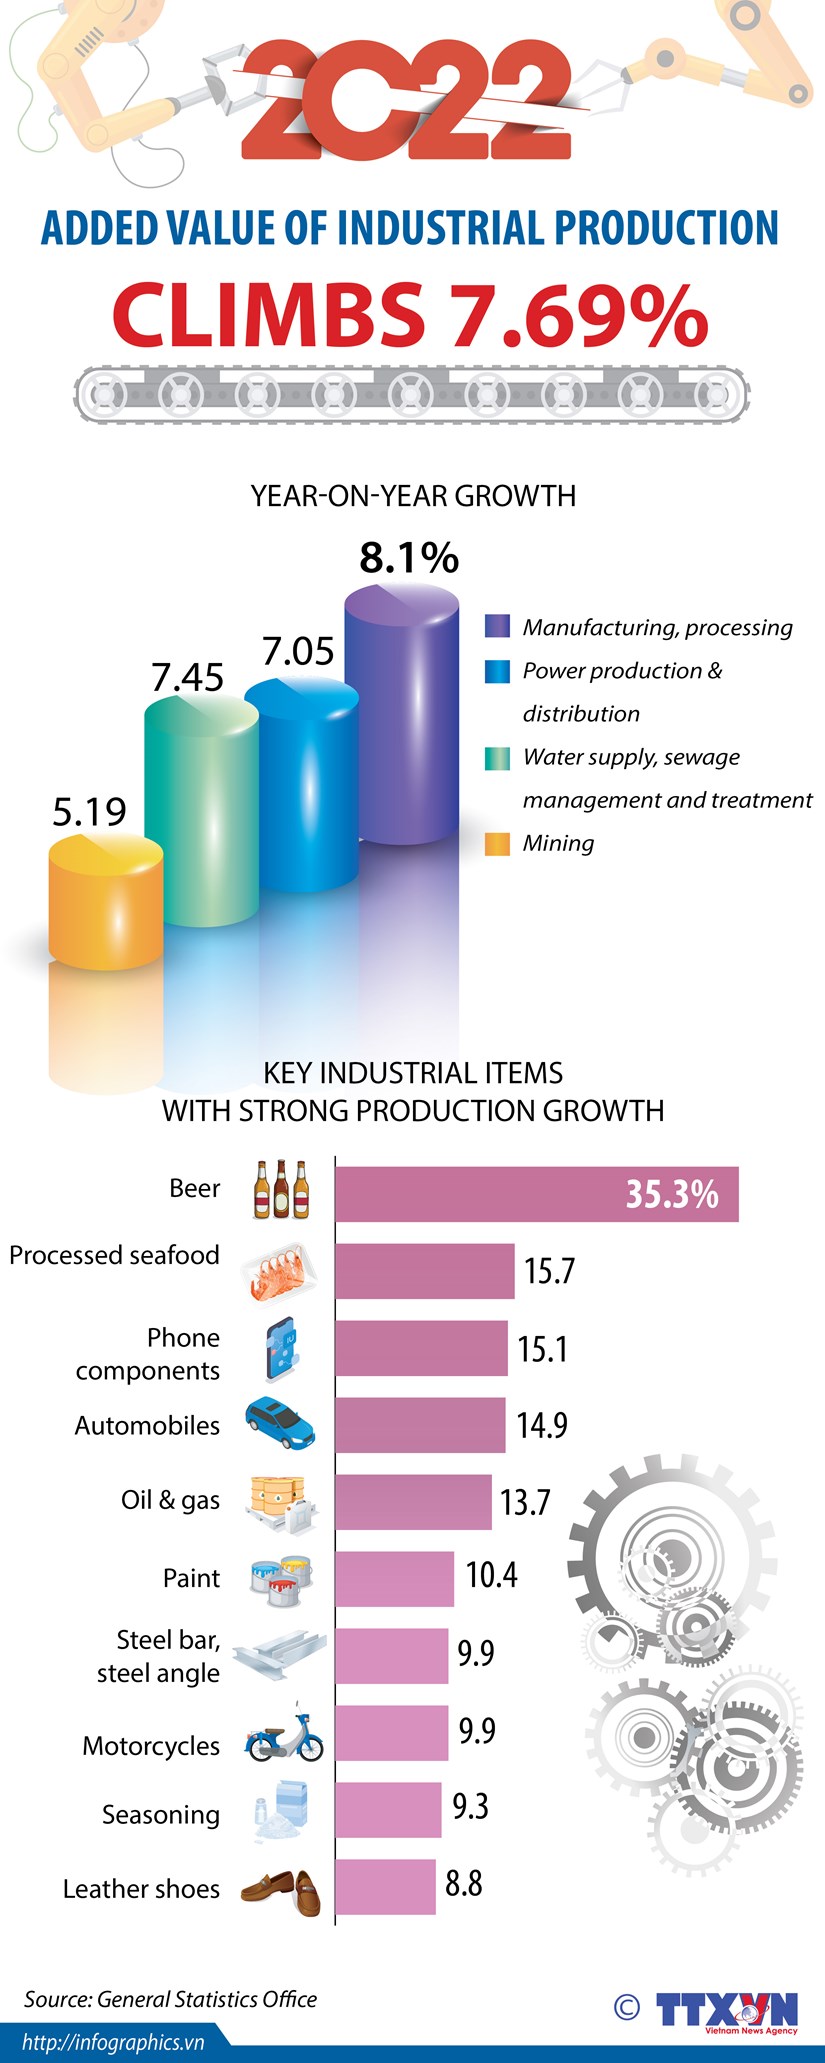 Added value of industrial production in 2022 climbs 7.69% hinh anh 1